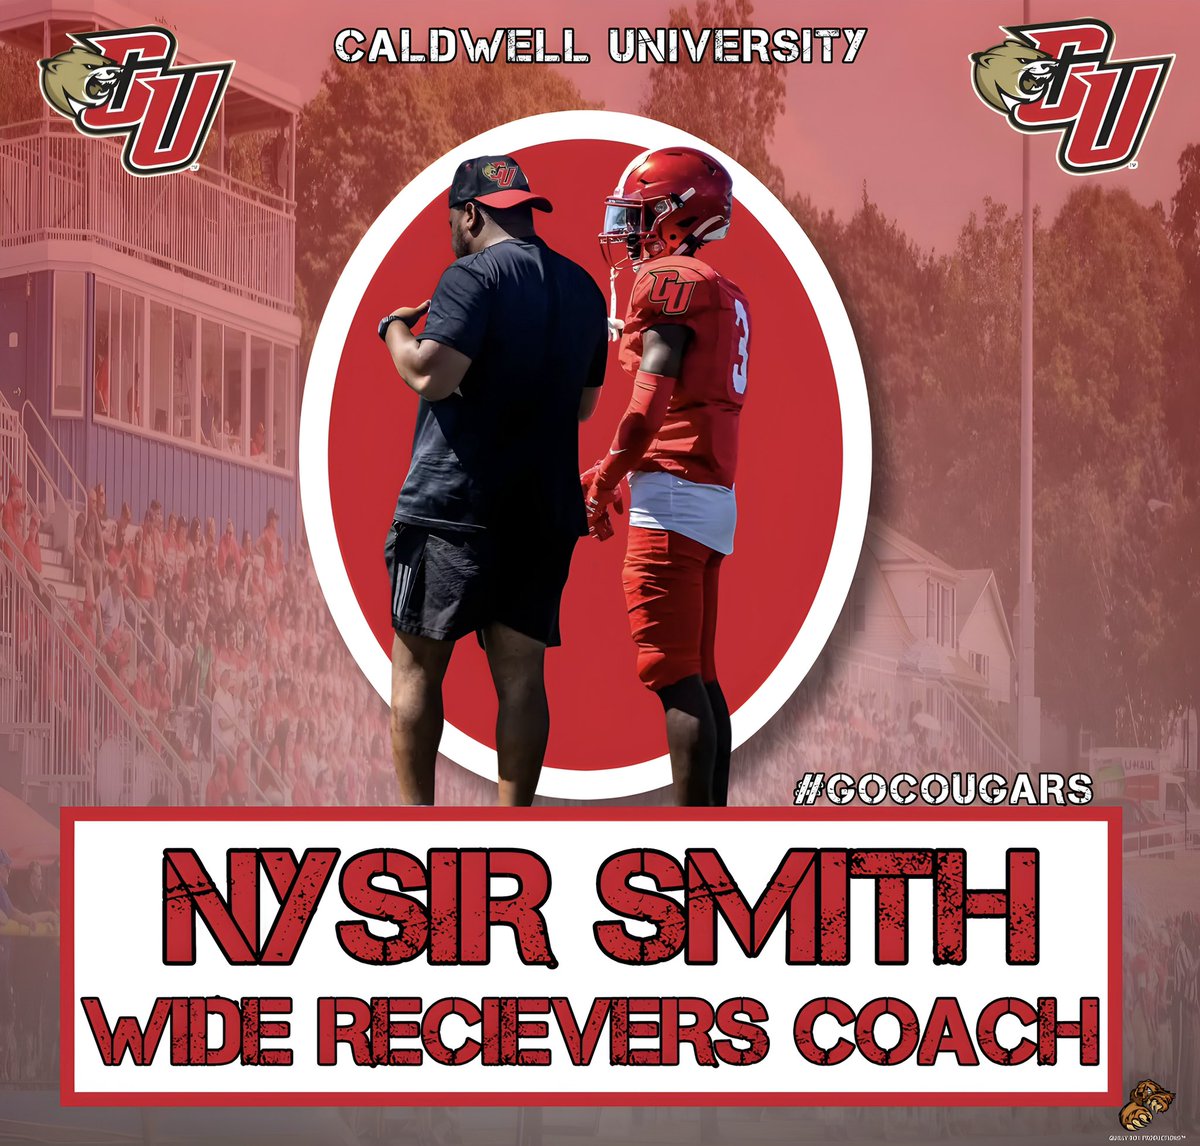 I am blessed to announce I am the new Wide Recievers coach at Caldwell University! So excited to get to campus and work with the guys! Go Cougars!! 🐾❤️ #NJ #Letswork